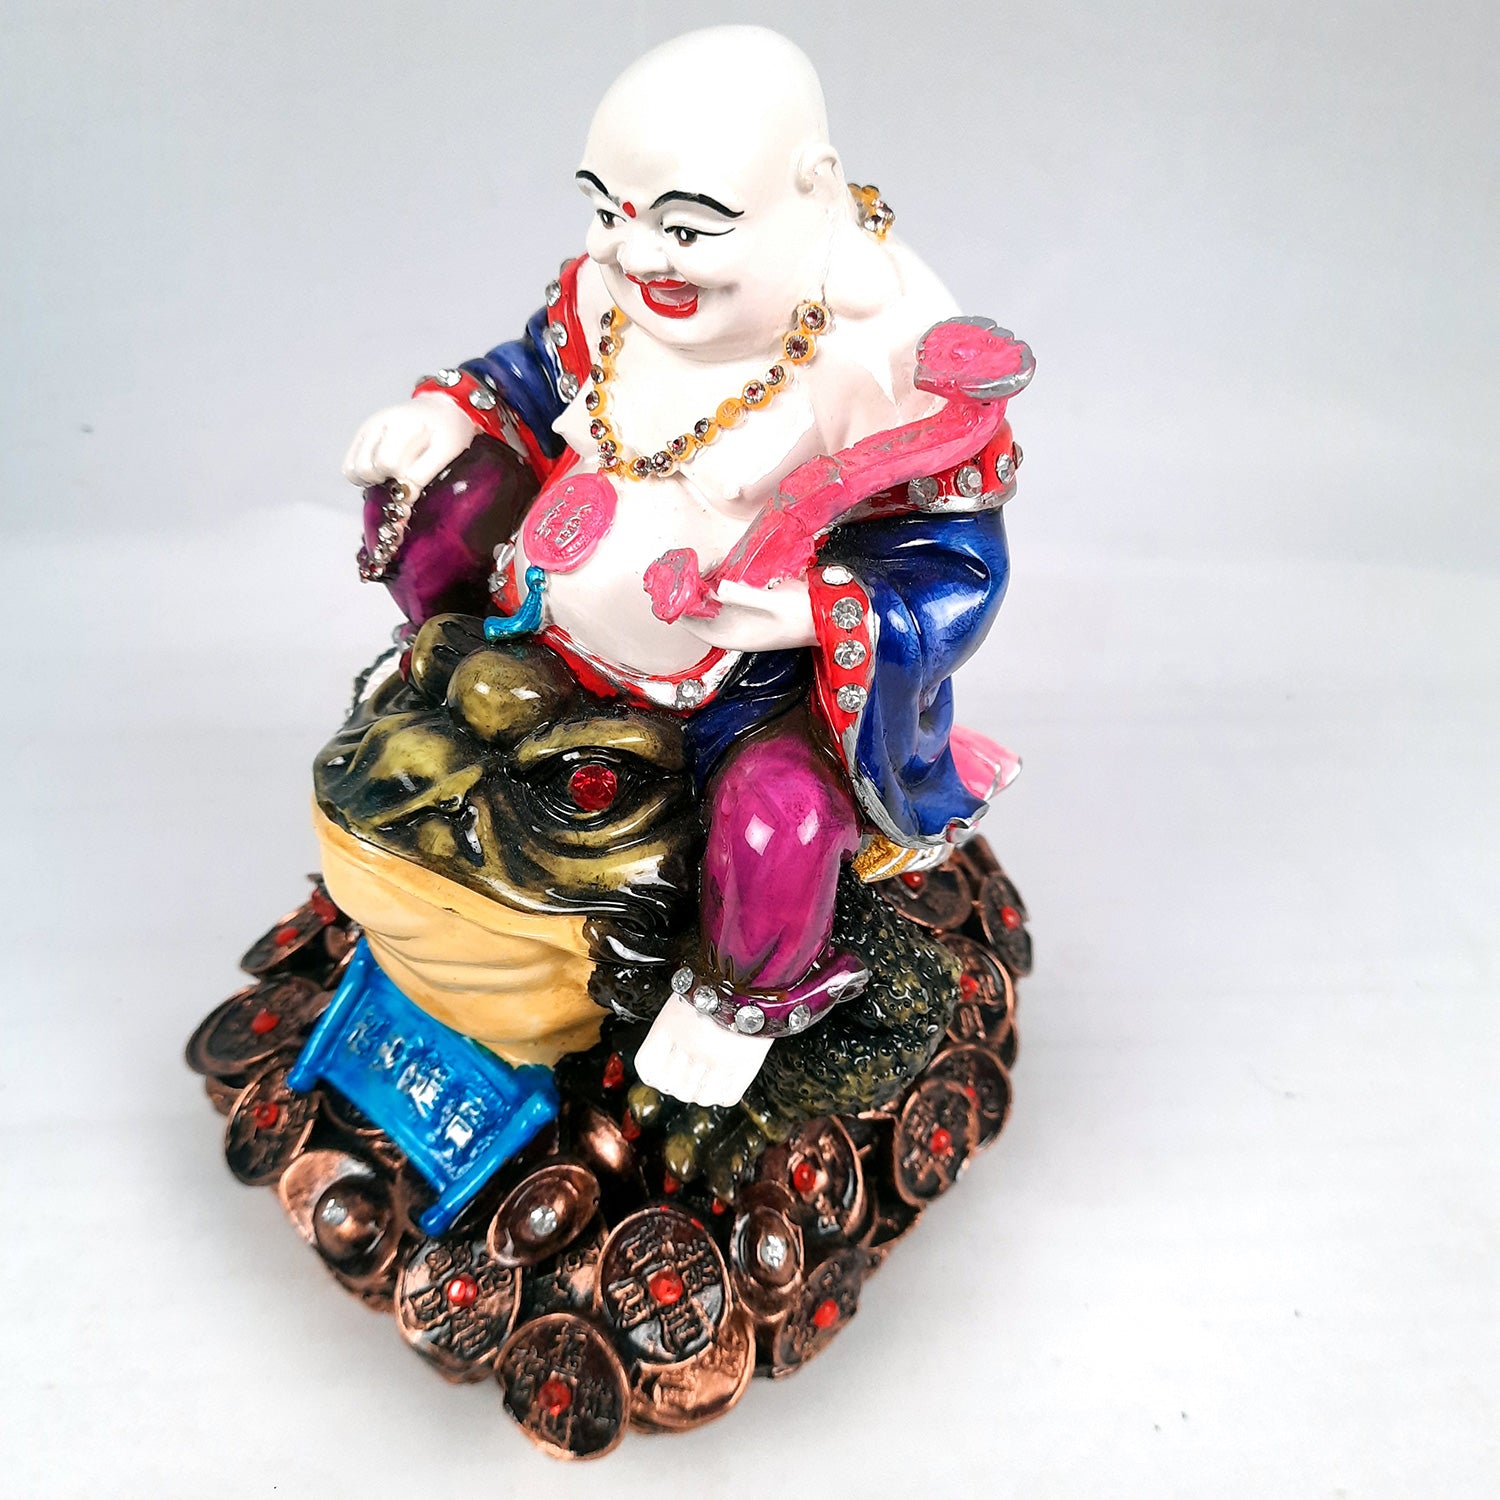 Laughing Buddha Showpiece | Laughing Buddha Statue - Sitting On Feng Shui Frog Design - for Good Luck, Money, Prosperity & Wealth - 10 Inch - Apkamart #Size_10 Inch